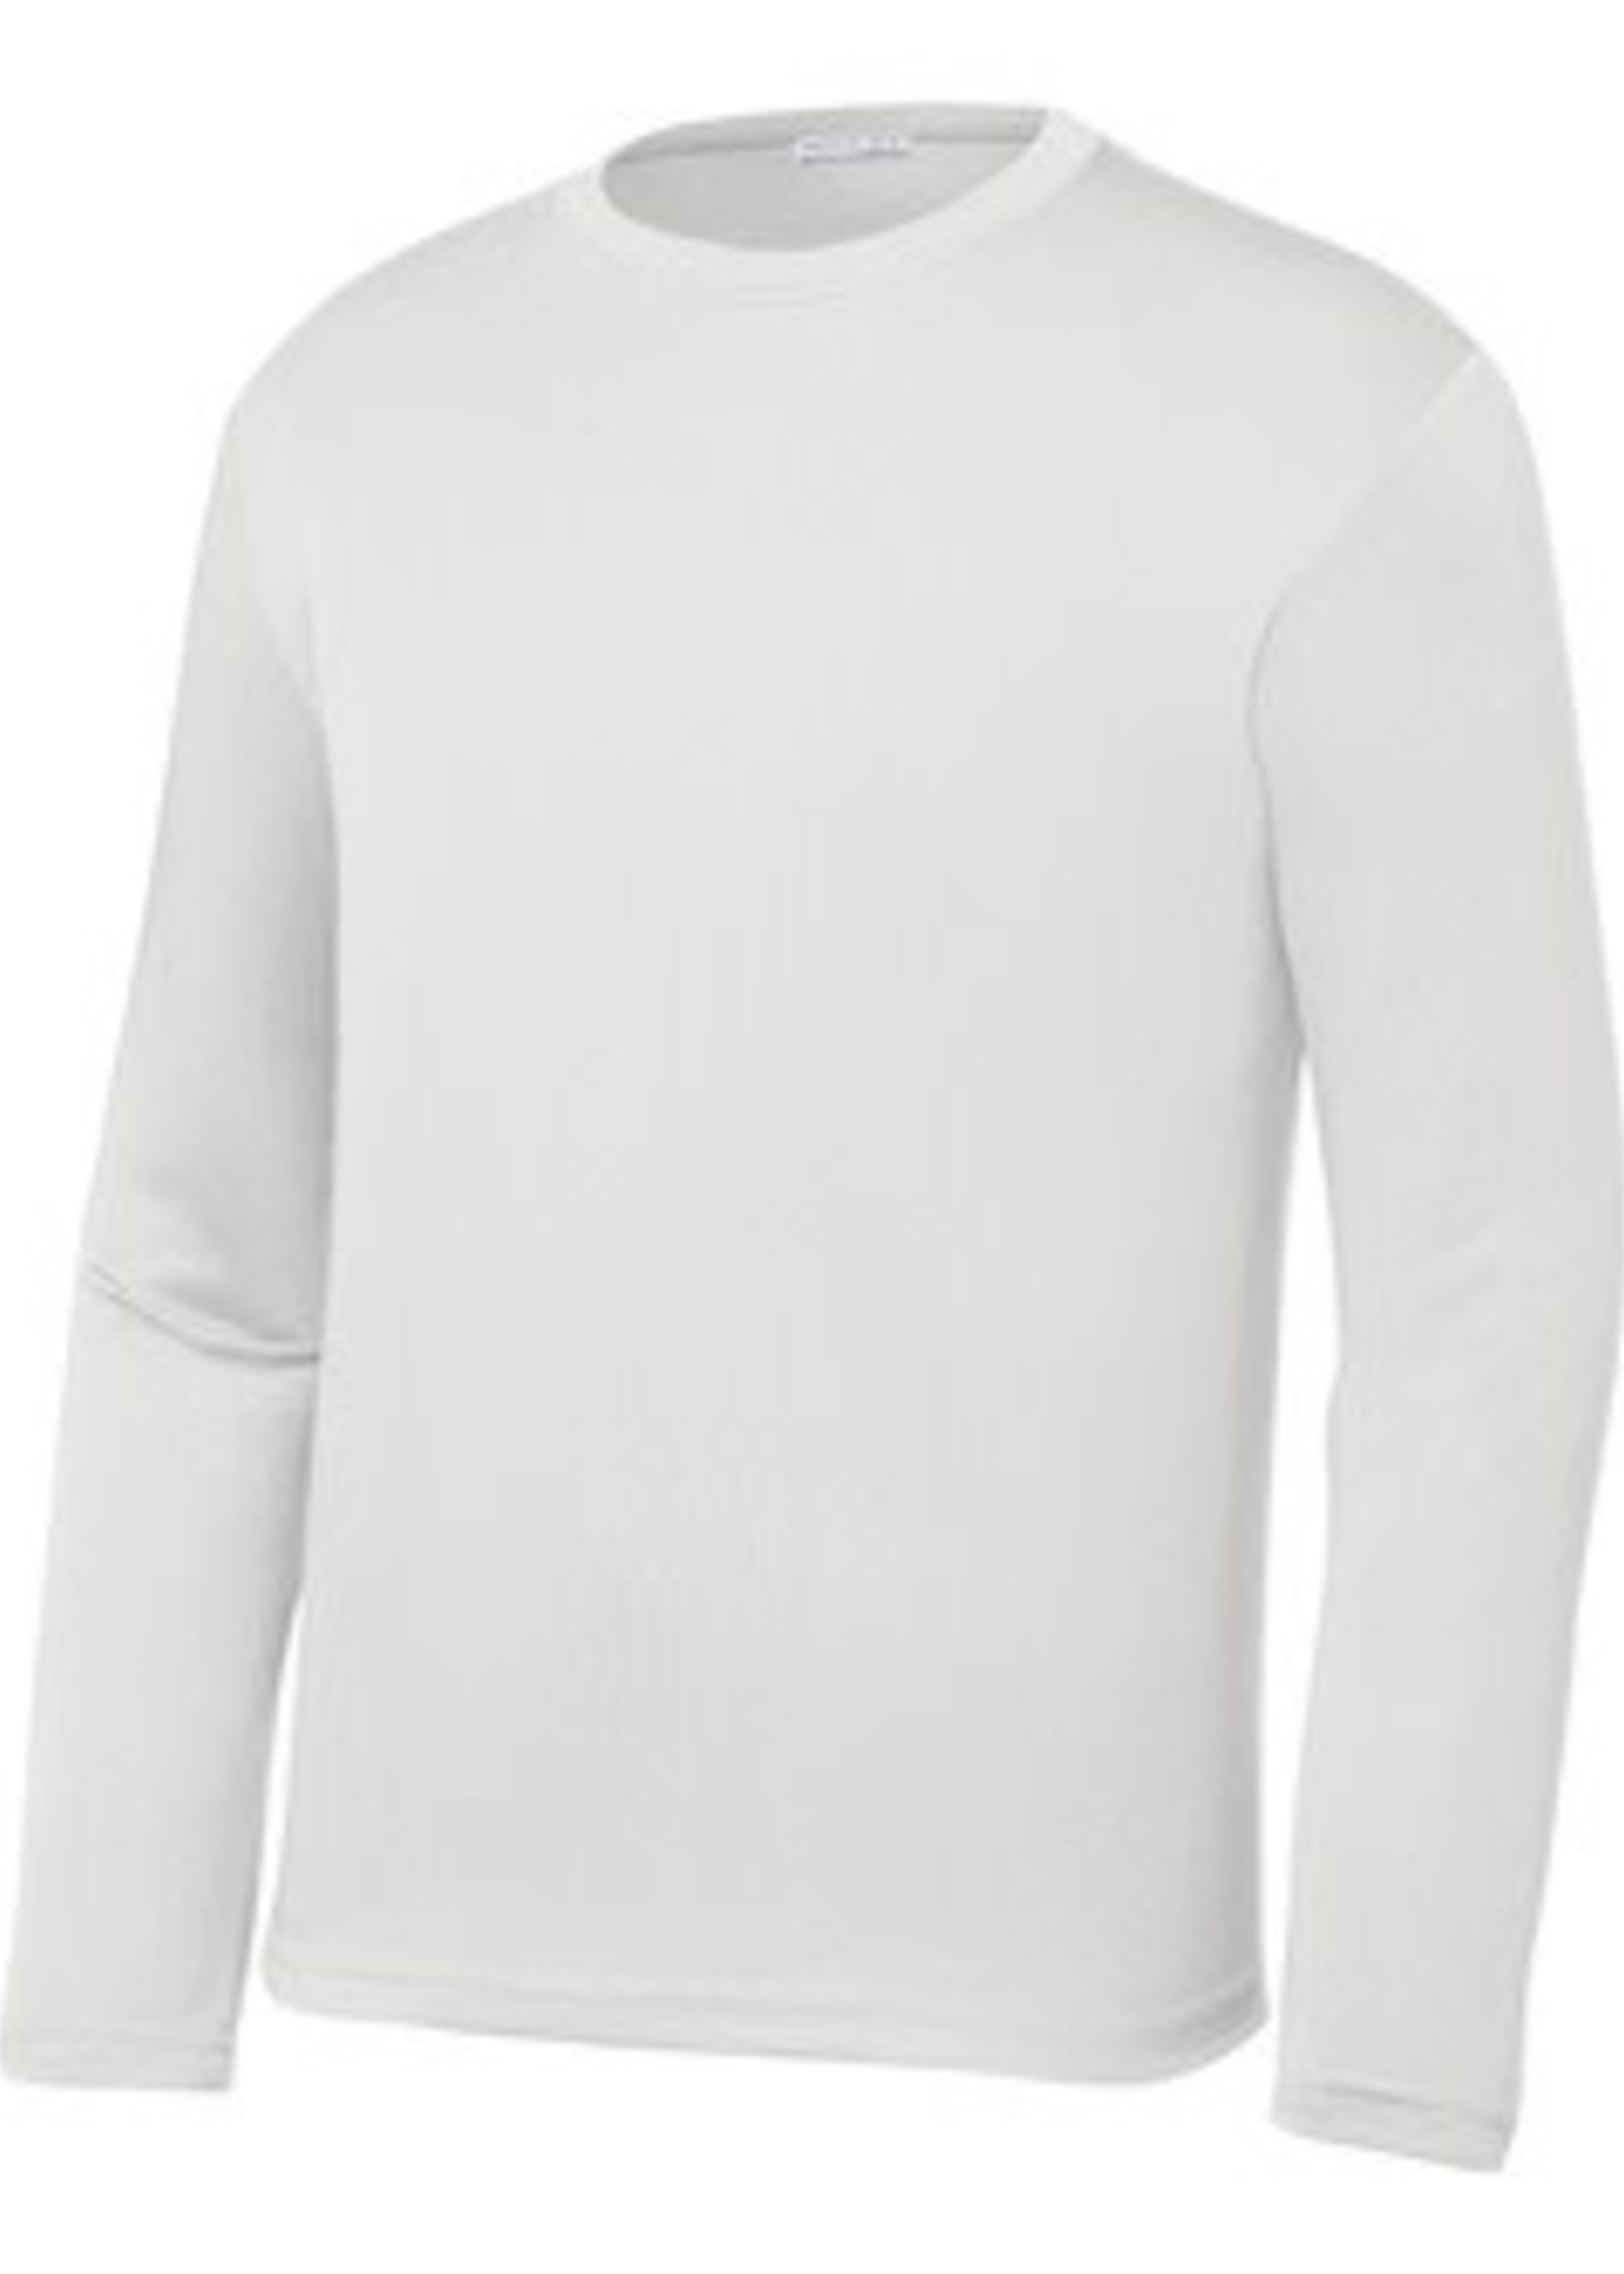 White Competitor LS Tee